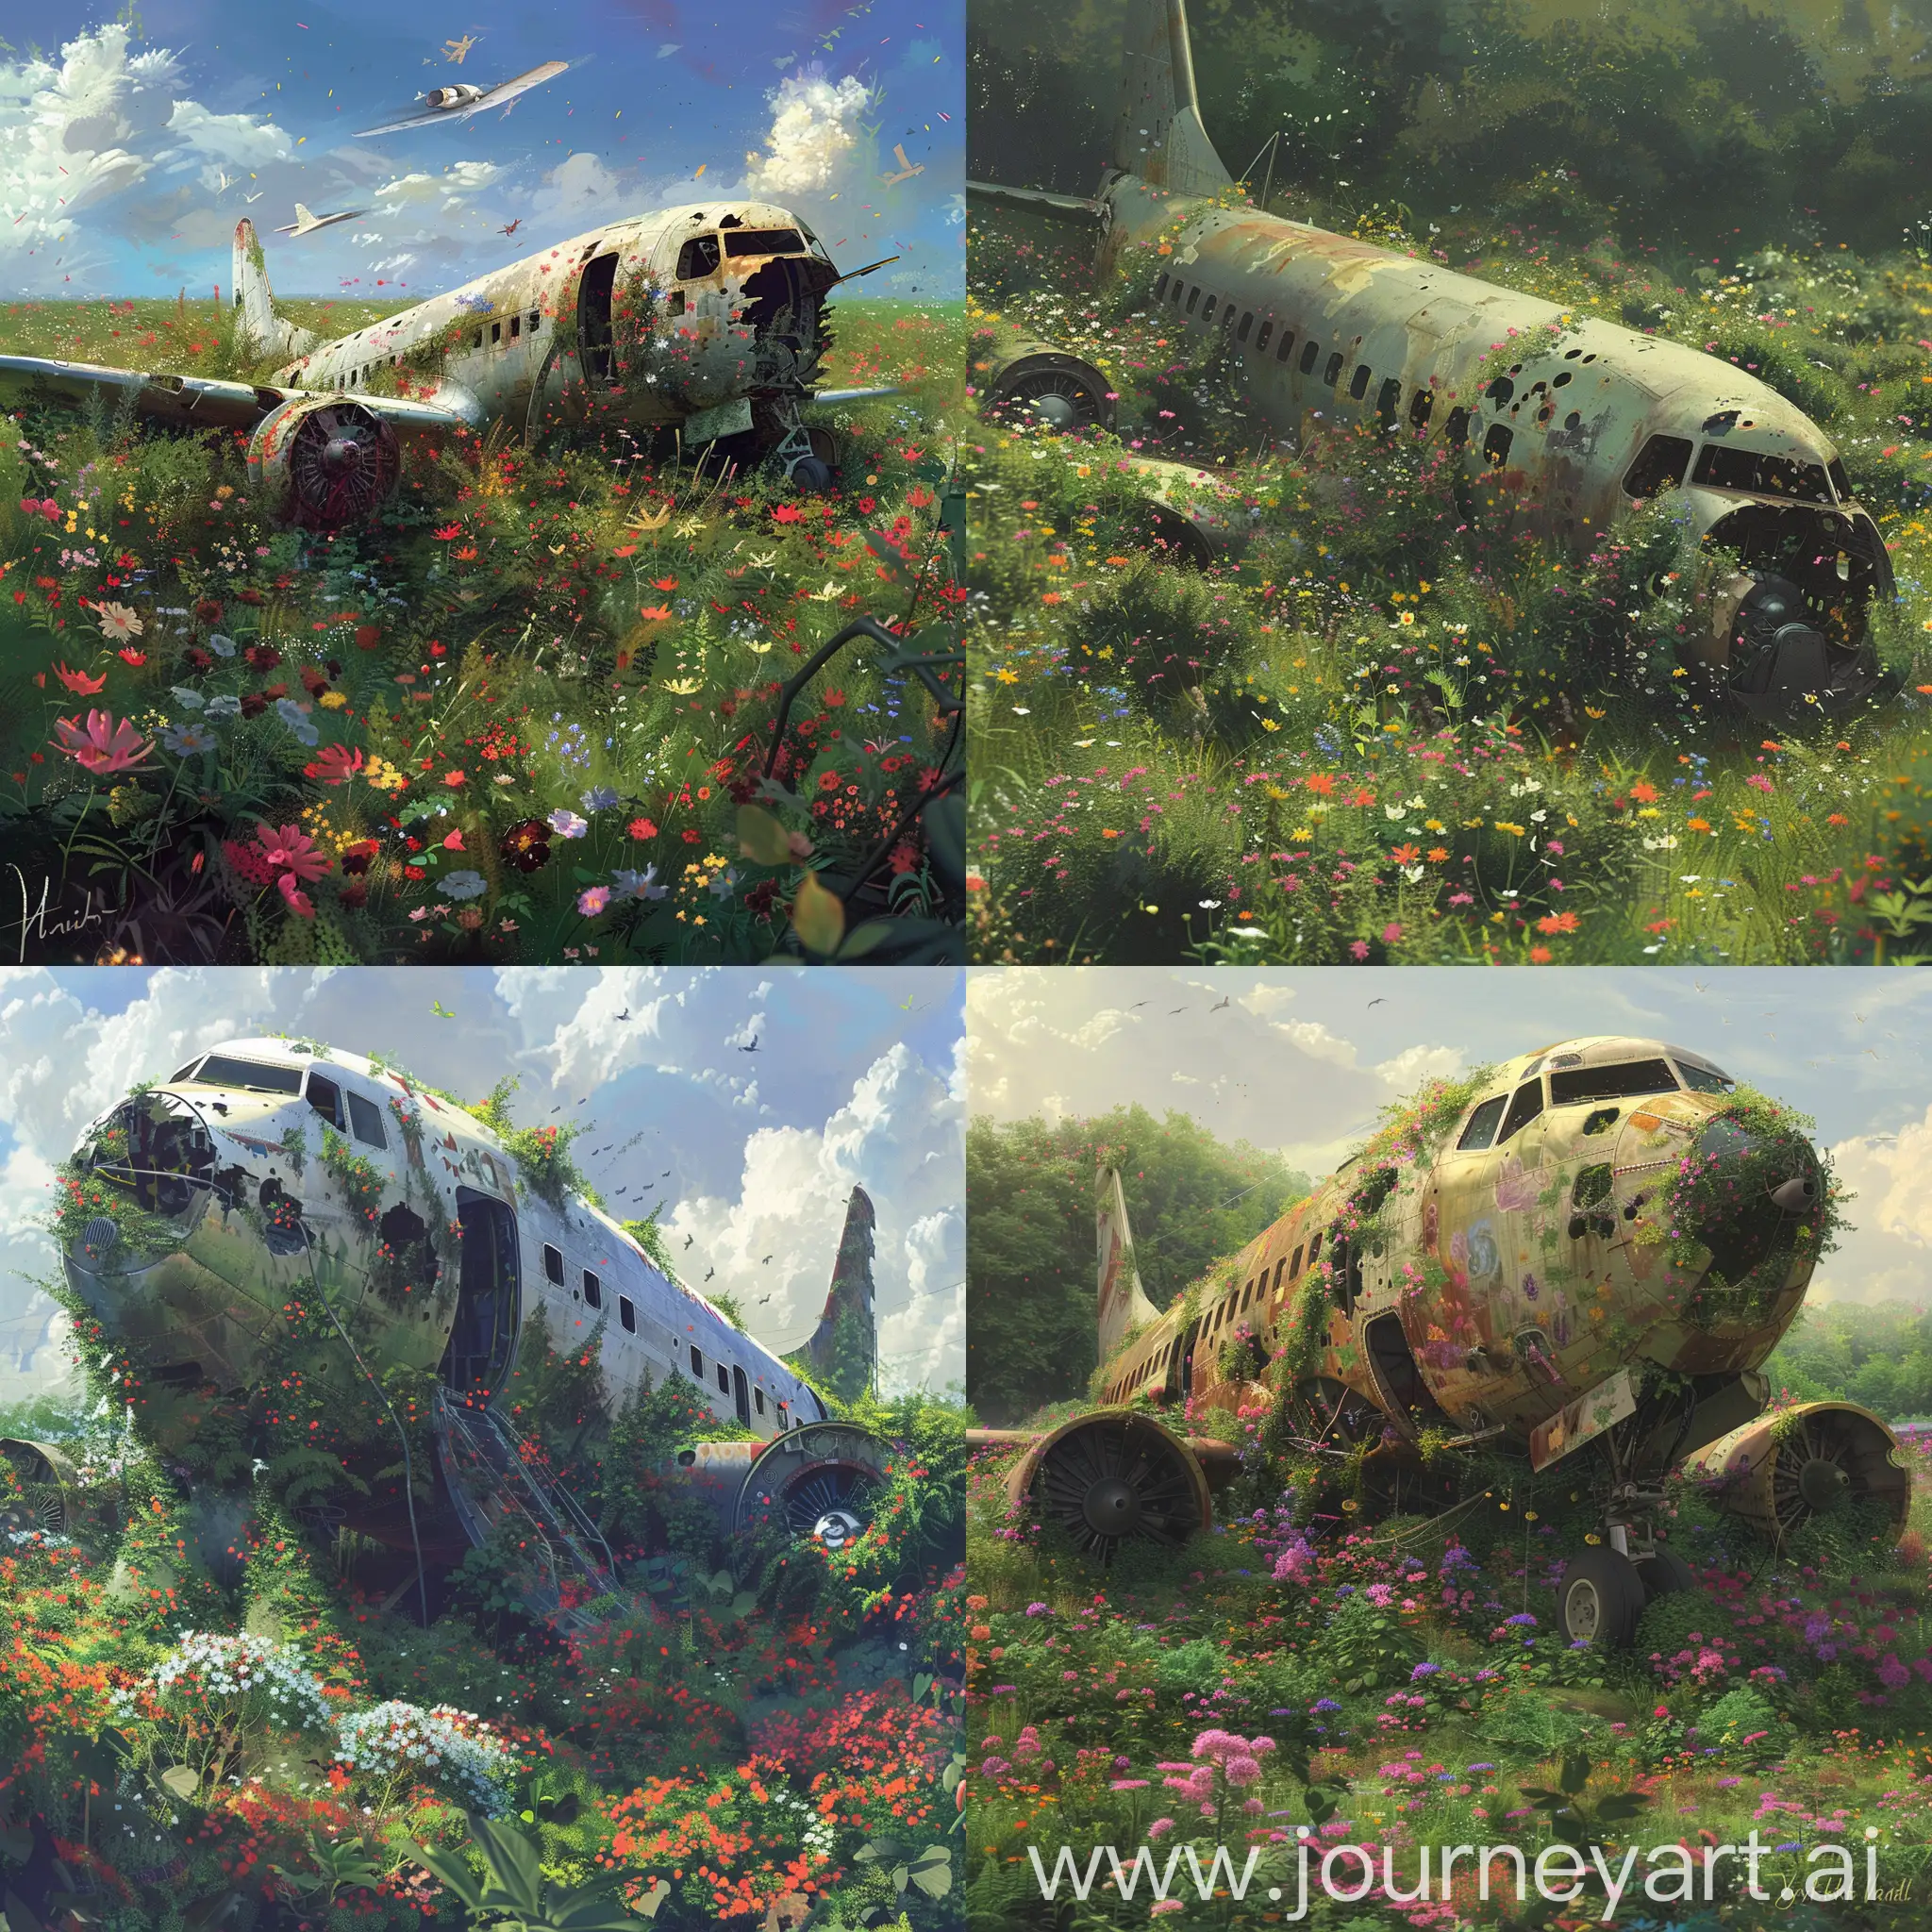 there is a painting of an old airplane in a field of flowers, beautiful digital artwork, stunning art style, overgrowth. by makoto shinkai, ross tran. scenic background, by Yoshihiko Wada, lan mcque, stefan koidl inspired, beautiful detailed concept art, by sylvain sarrailh, humanoids overgrown with flowers